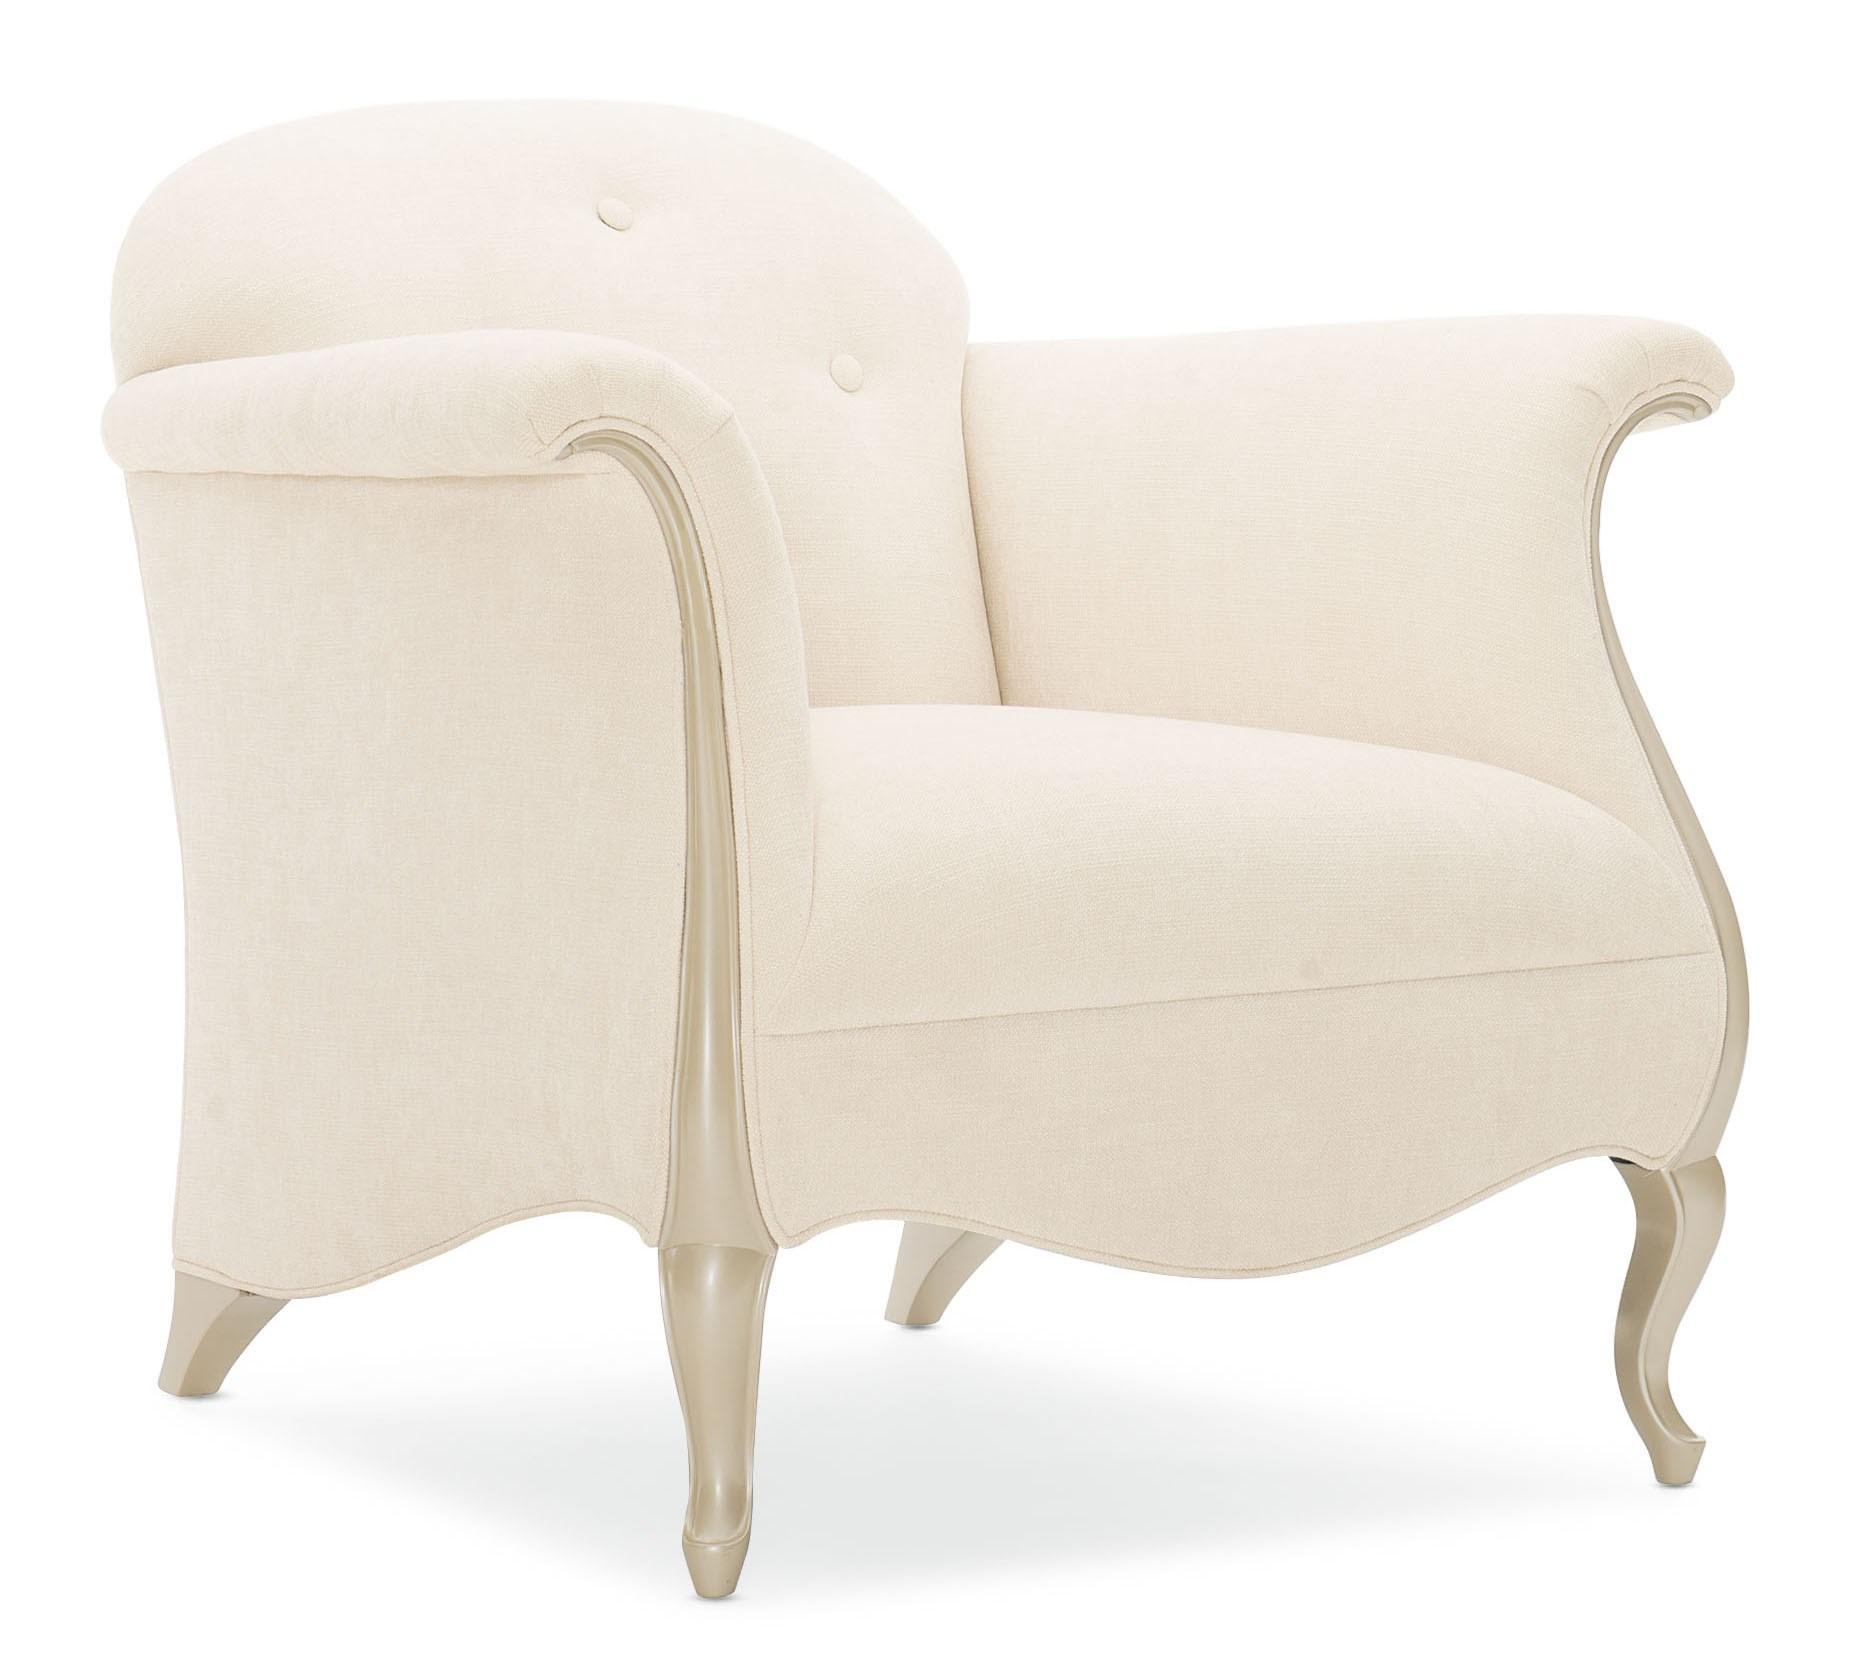 Contemporary Accent Chair TWO TO TANGO CHAIR UPH-019-132-B in Cream Fabric